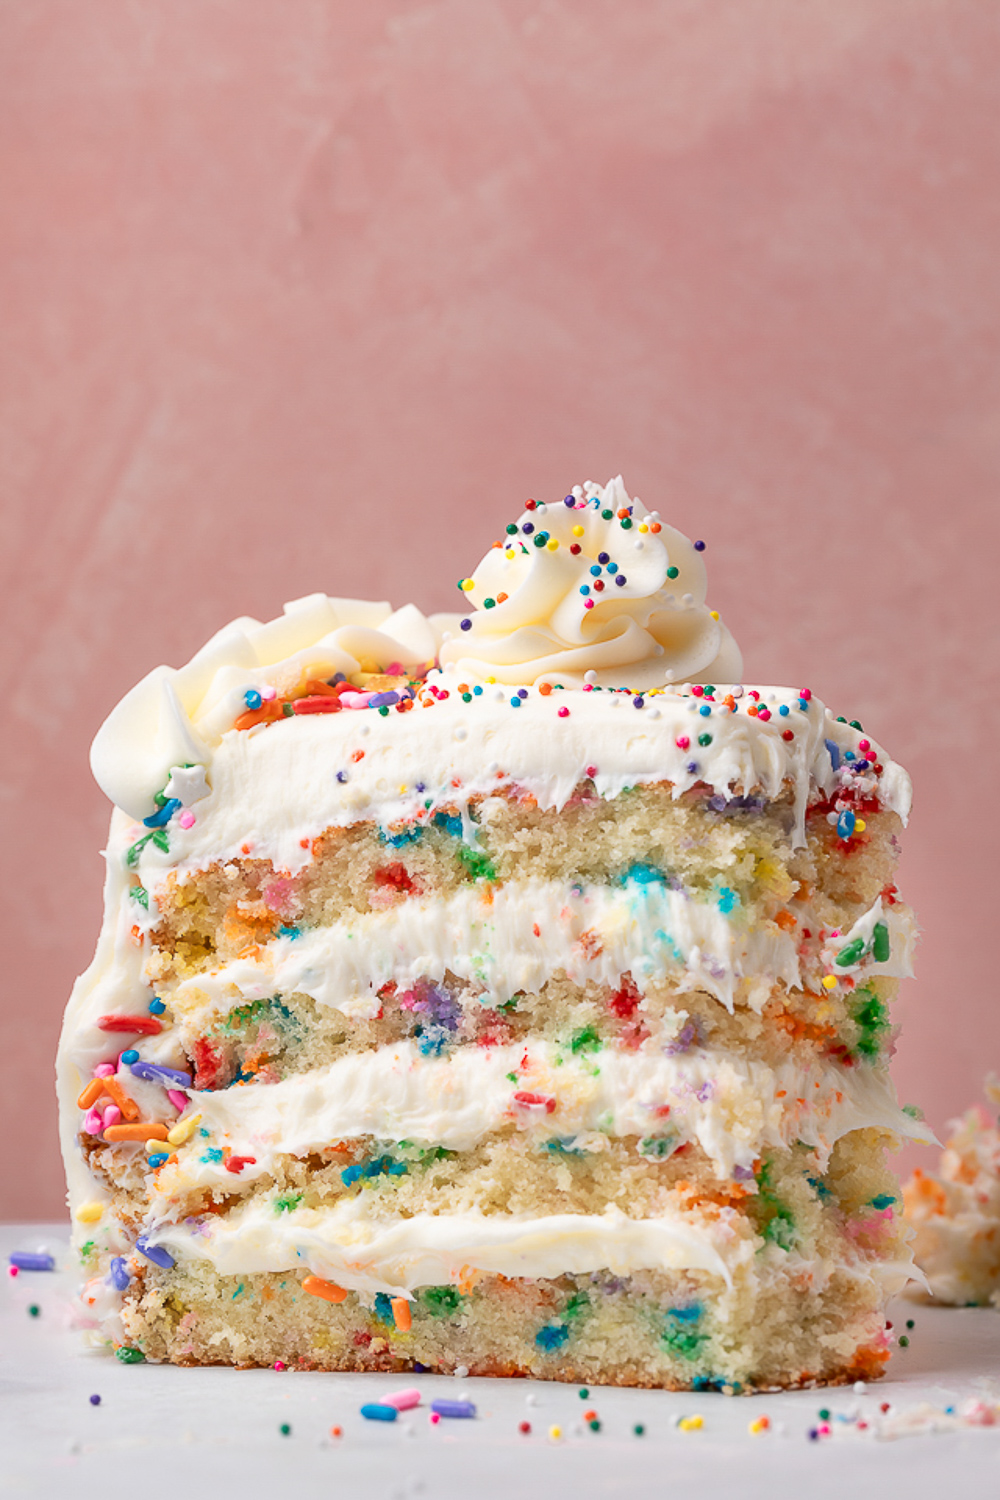 30 Best Cake Flavors To Try (+ Easy Recipes) - Insanely Good-hanic.com.vn